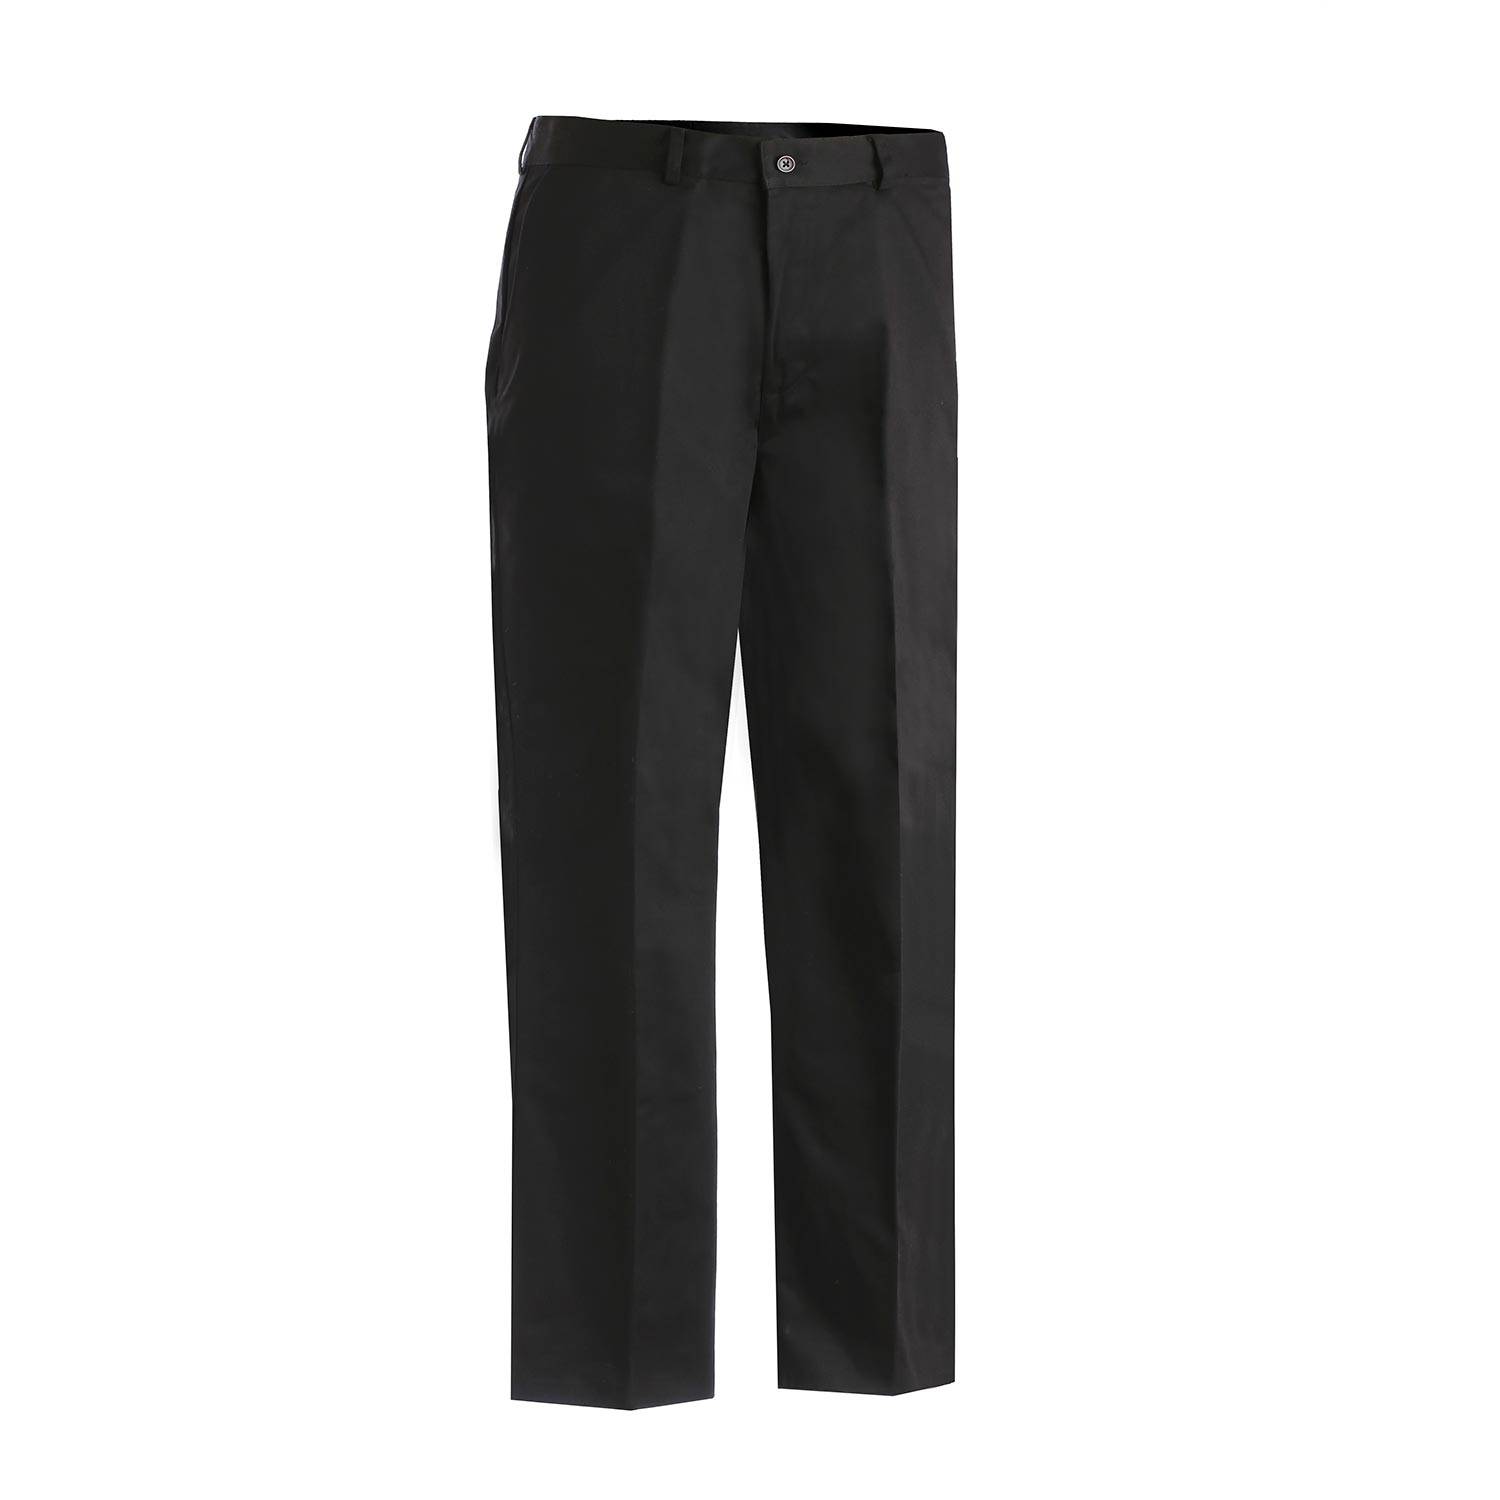 EDWARDS MEN'S EASY FIT CHINO FLAT FRONT PANT